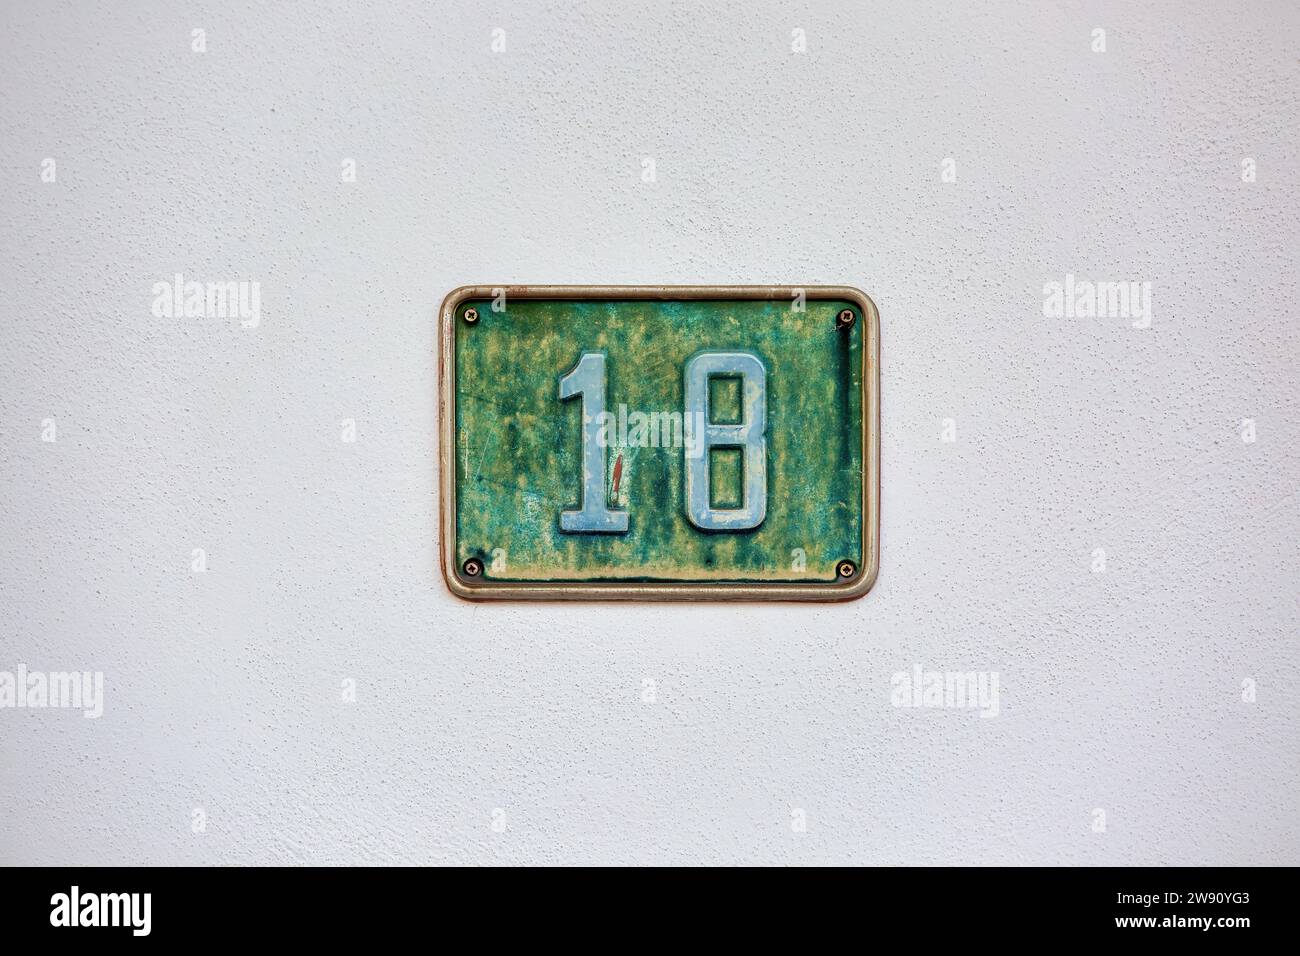 House Number 18: Address Marker on House Wall Stock Photo